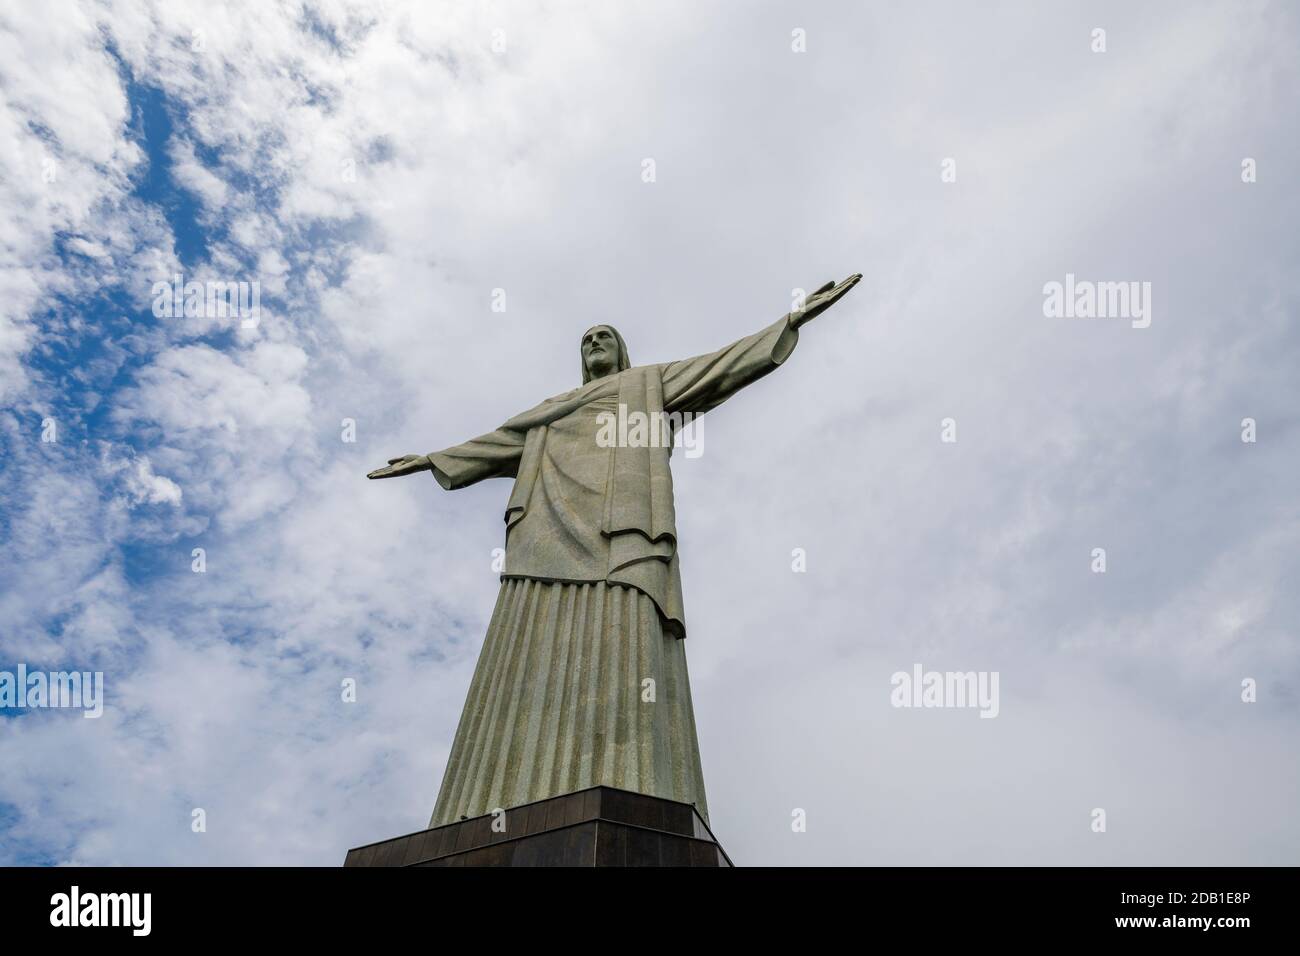 Mirador Cristo Redentor, the huge iconic statue of Christ the Redeemer with outstretched arms on Corcovado Mountain, Rio de Janeiro, Brazil Stock Photo